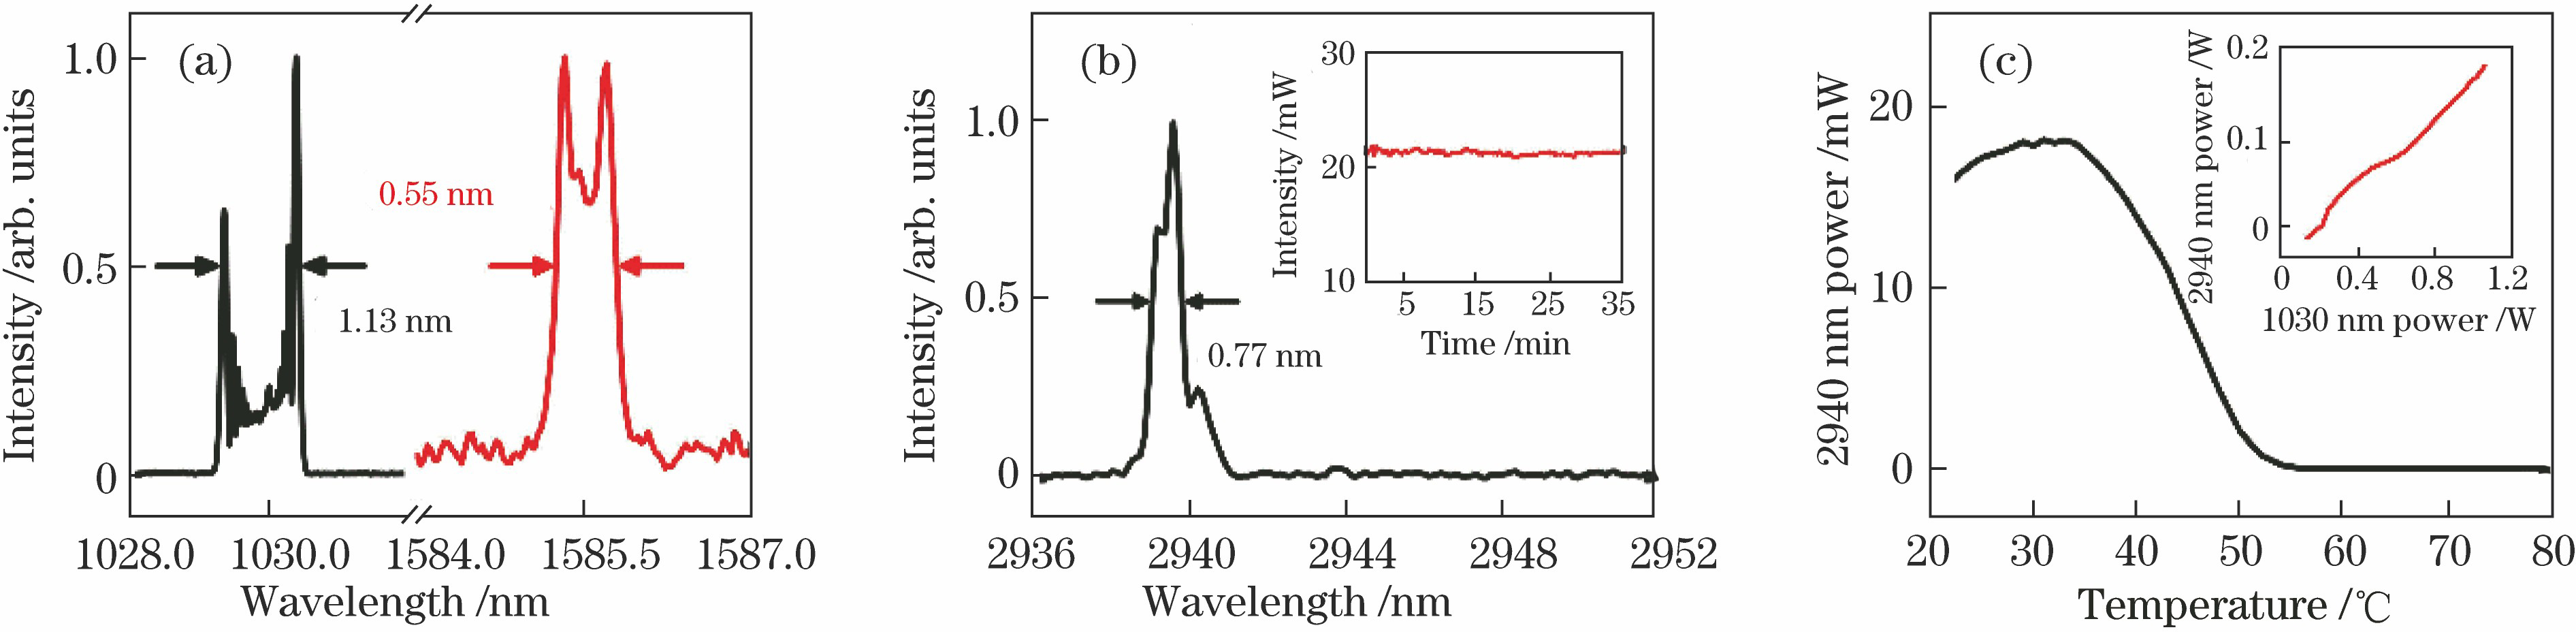 Experimental results. (a) 1029.9 nm and 1585.5 nm spectra; (b) mid-infrared spectra and stability; (c) mid-infrared (2940 nm) laser power versus crystal temperature and (inset) incident pumping power